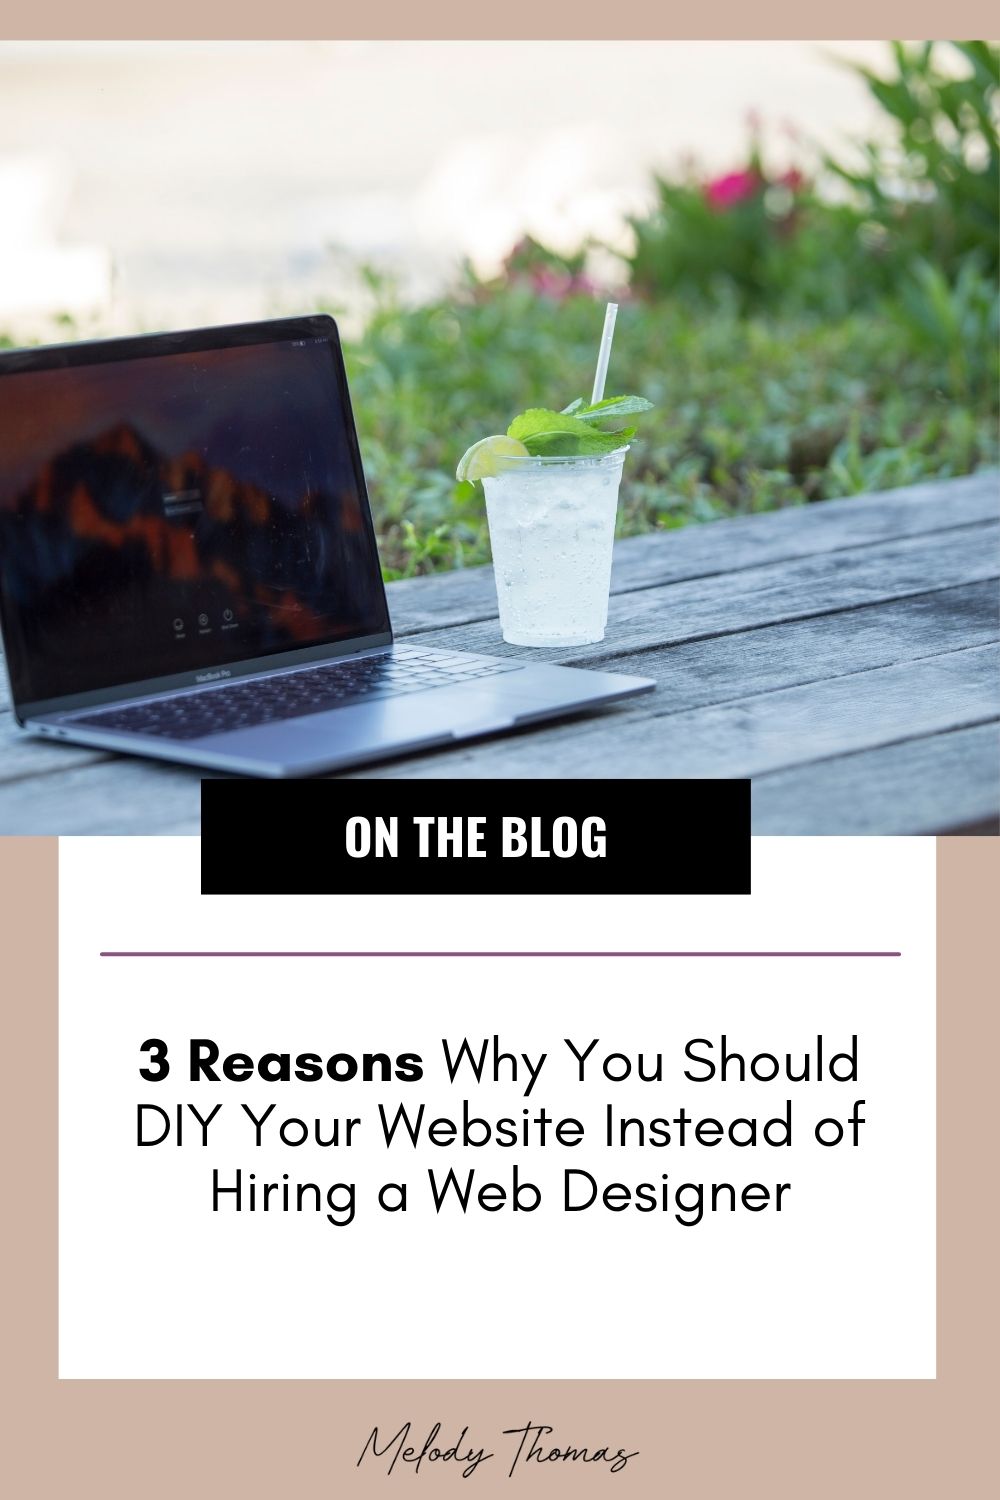 3 Reasons Why You Should DIY Your Website Instead of Hiring a Web Designer